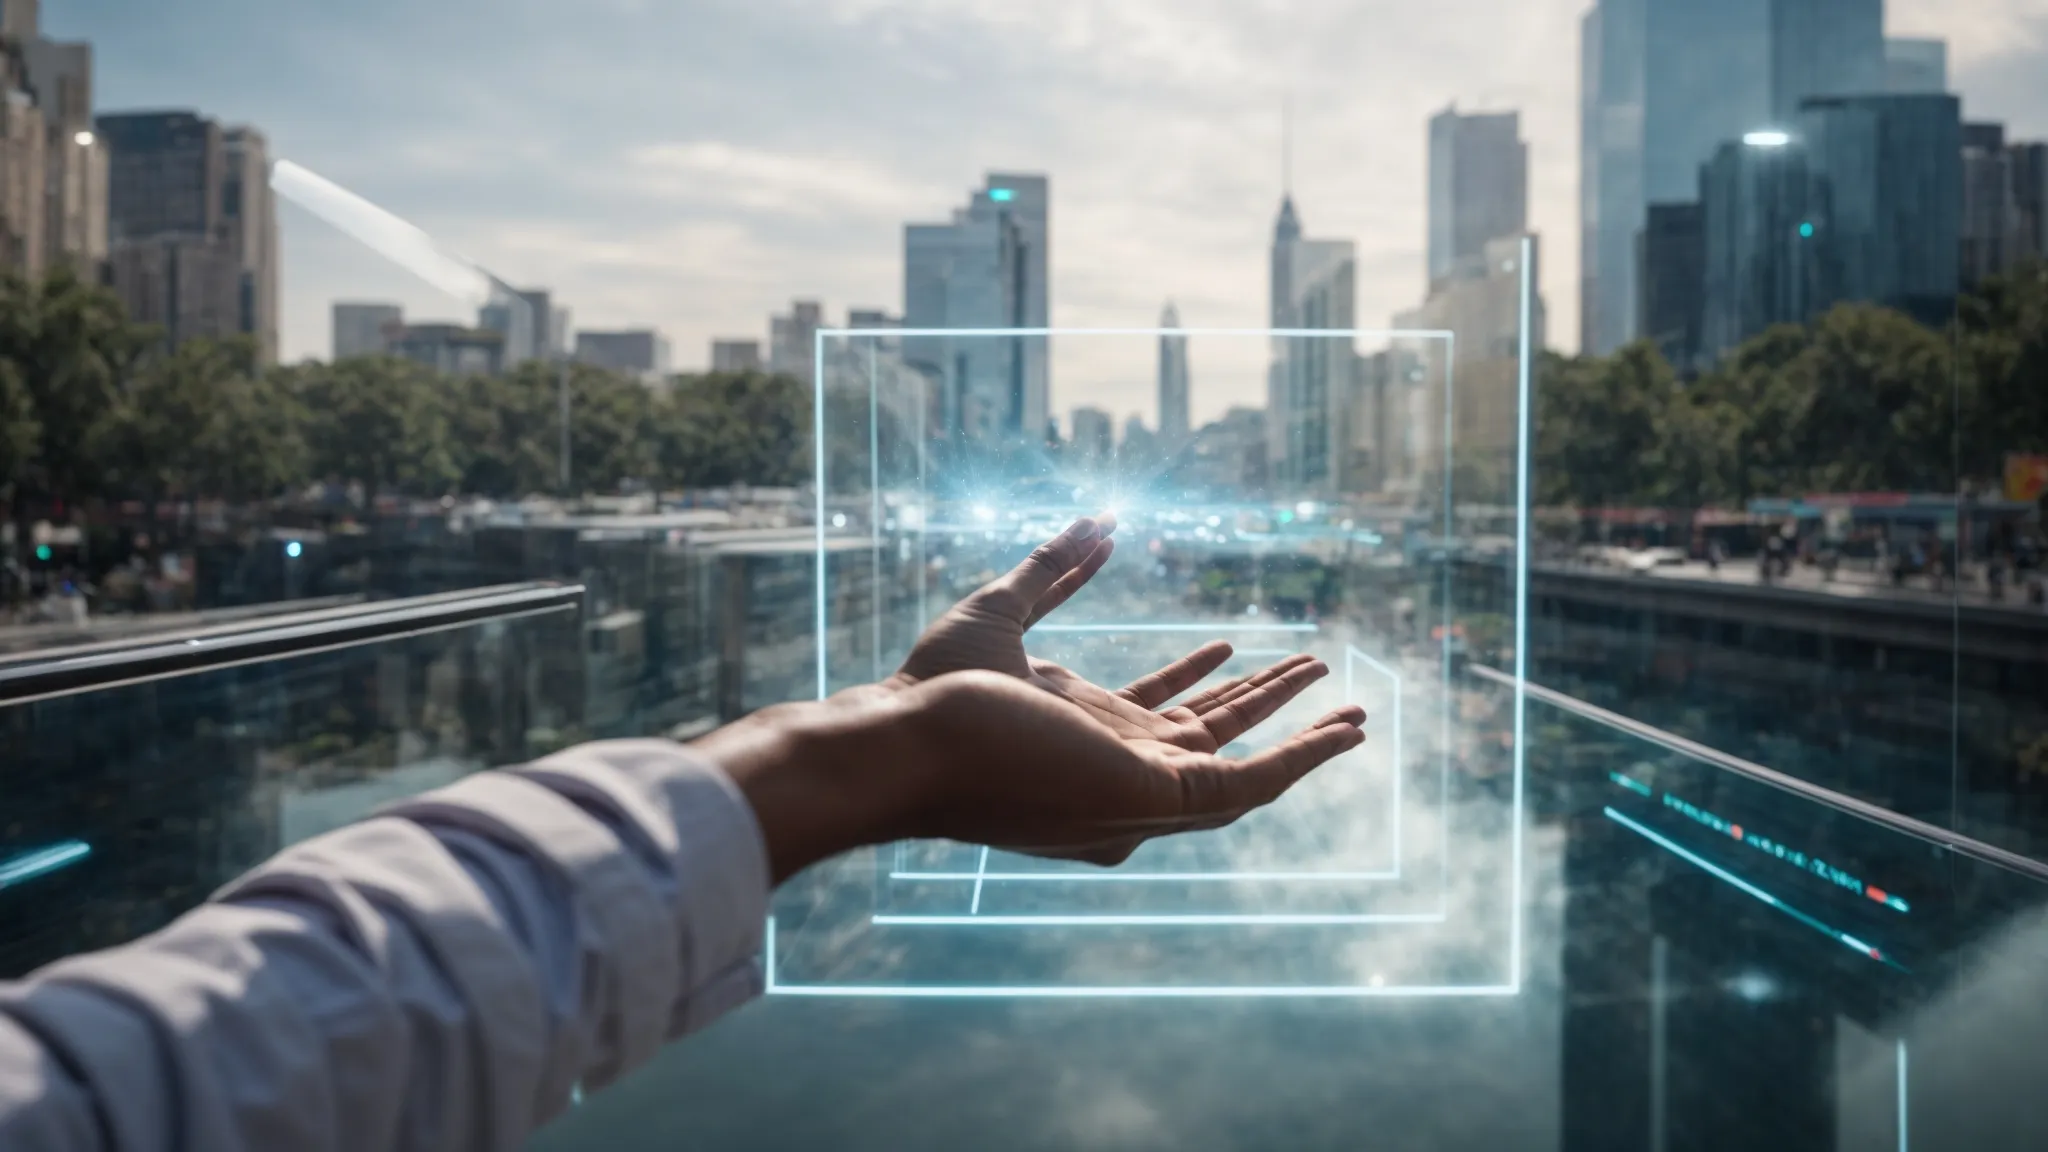 a person reaching out to touch a holographic advertisement floating in the air, blending cityscape and digital imagery seamlessly.